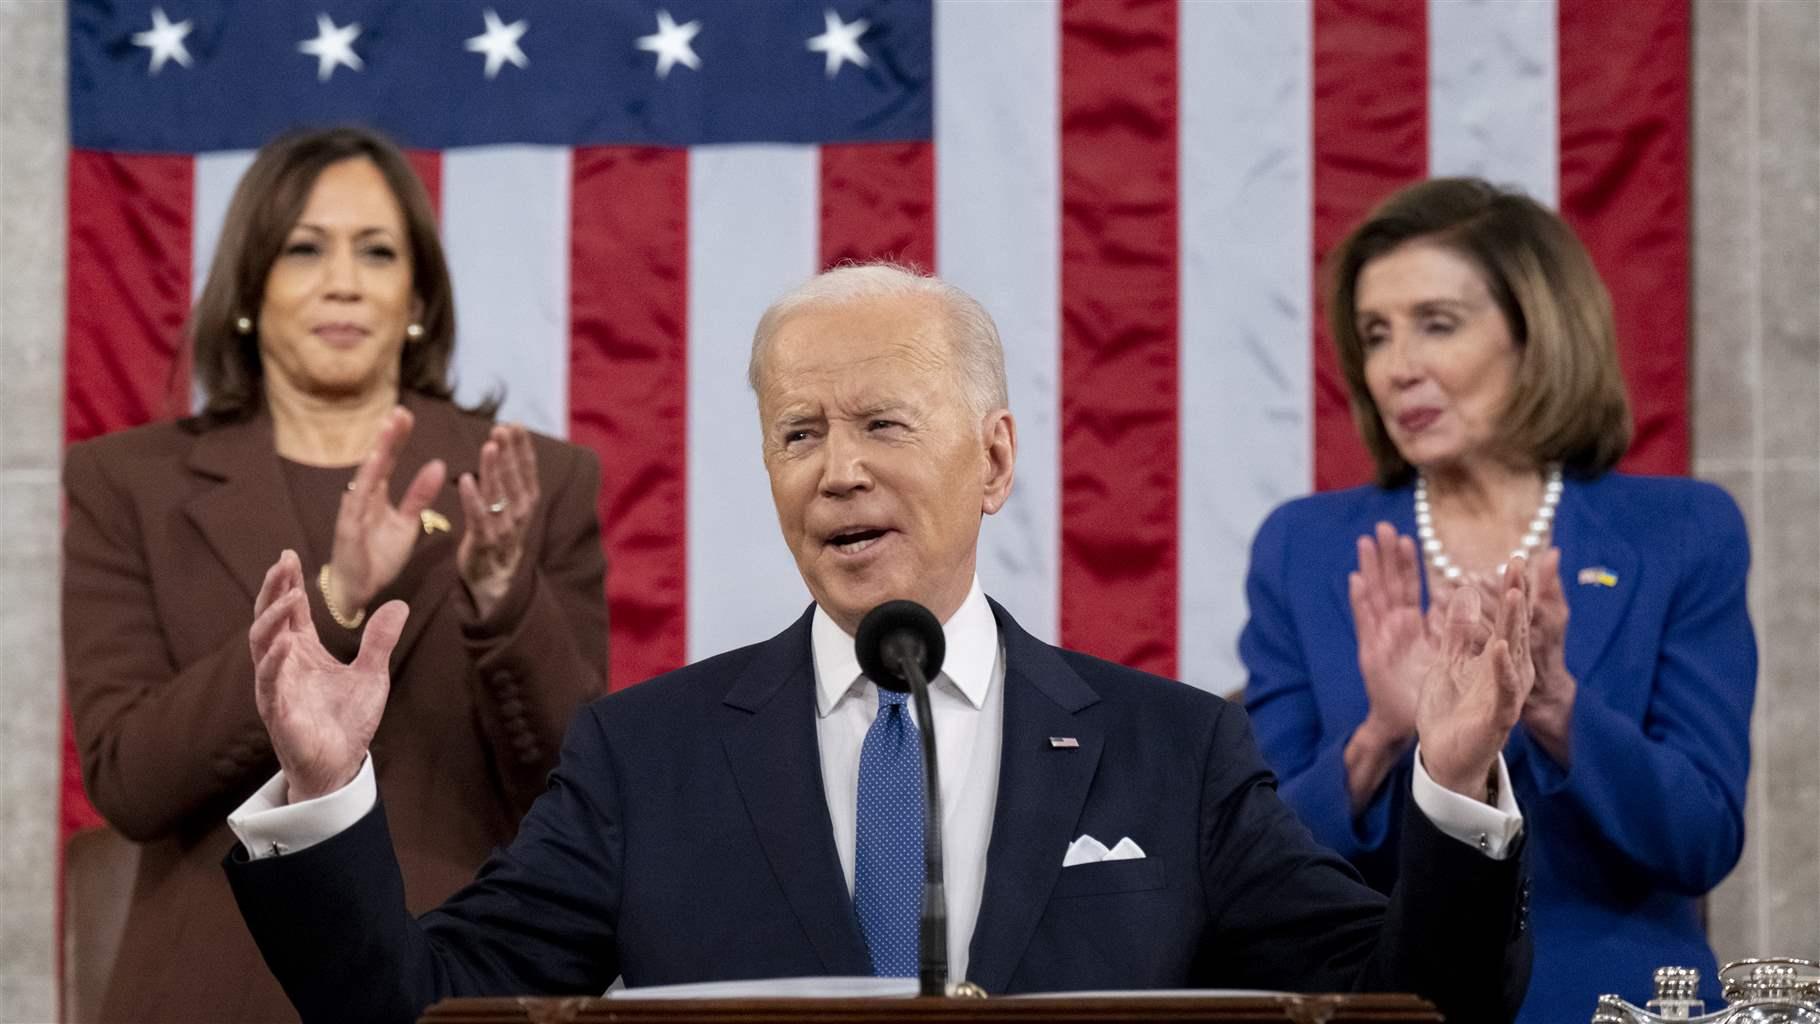 US President Joe Biden arrives to deliver the State of the Union address as U.S. Vice President Kamala Harris (L) and House Speaker Nancy Pelosi (D-CA) look on during a joint session of Congress in the U.S. Capitol House Chamber on March 1, 2022 in Washington, DC. 